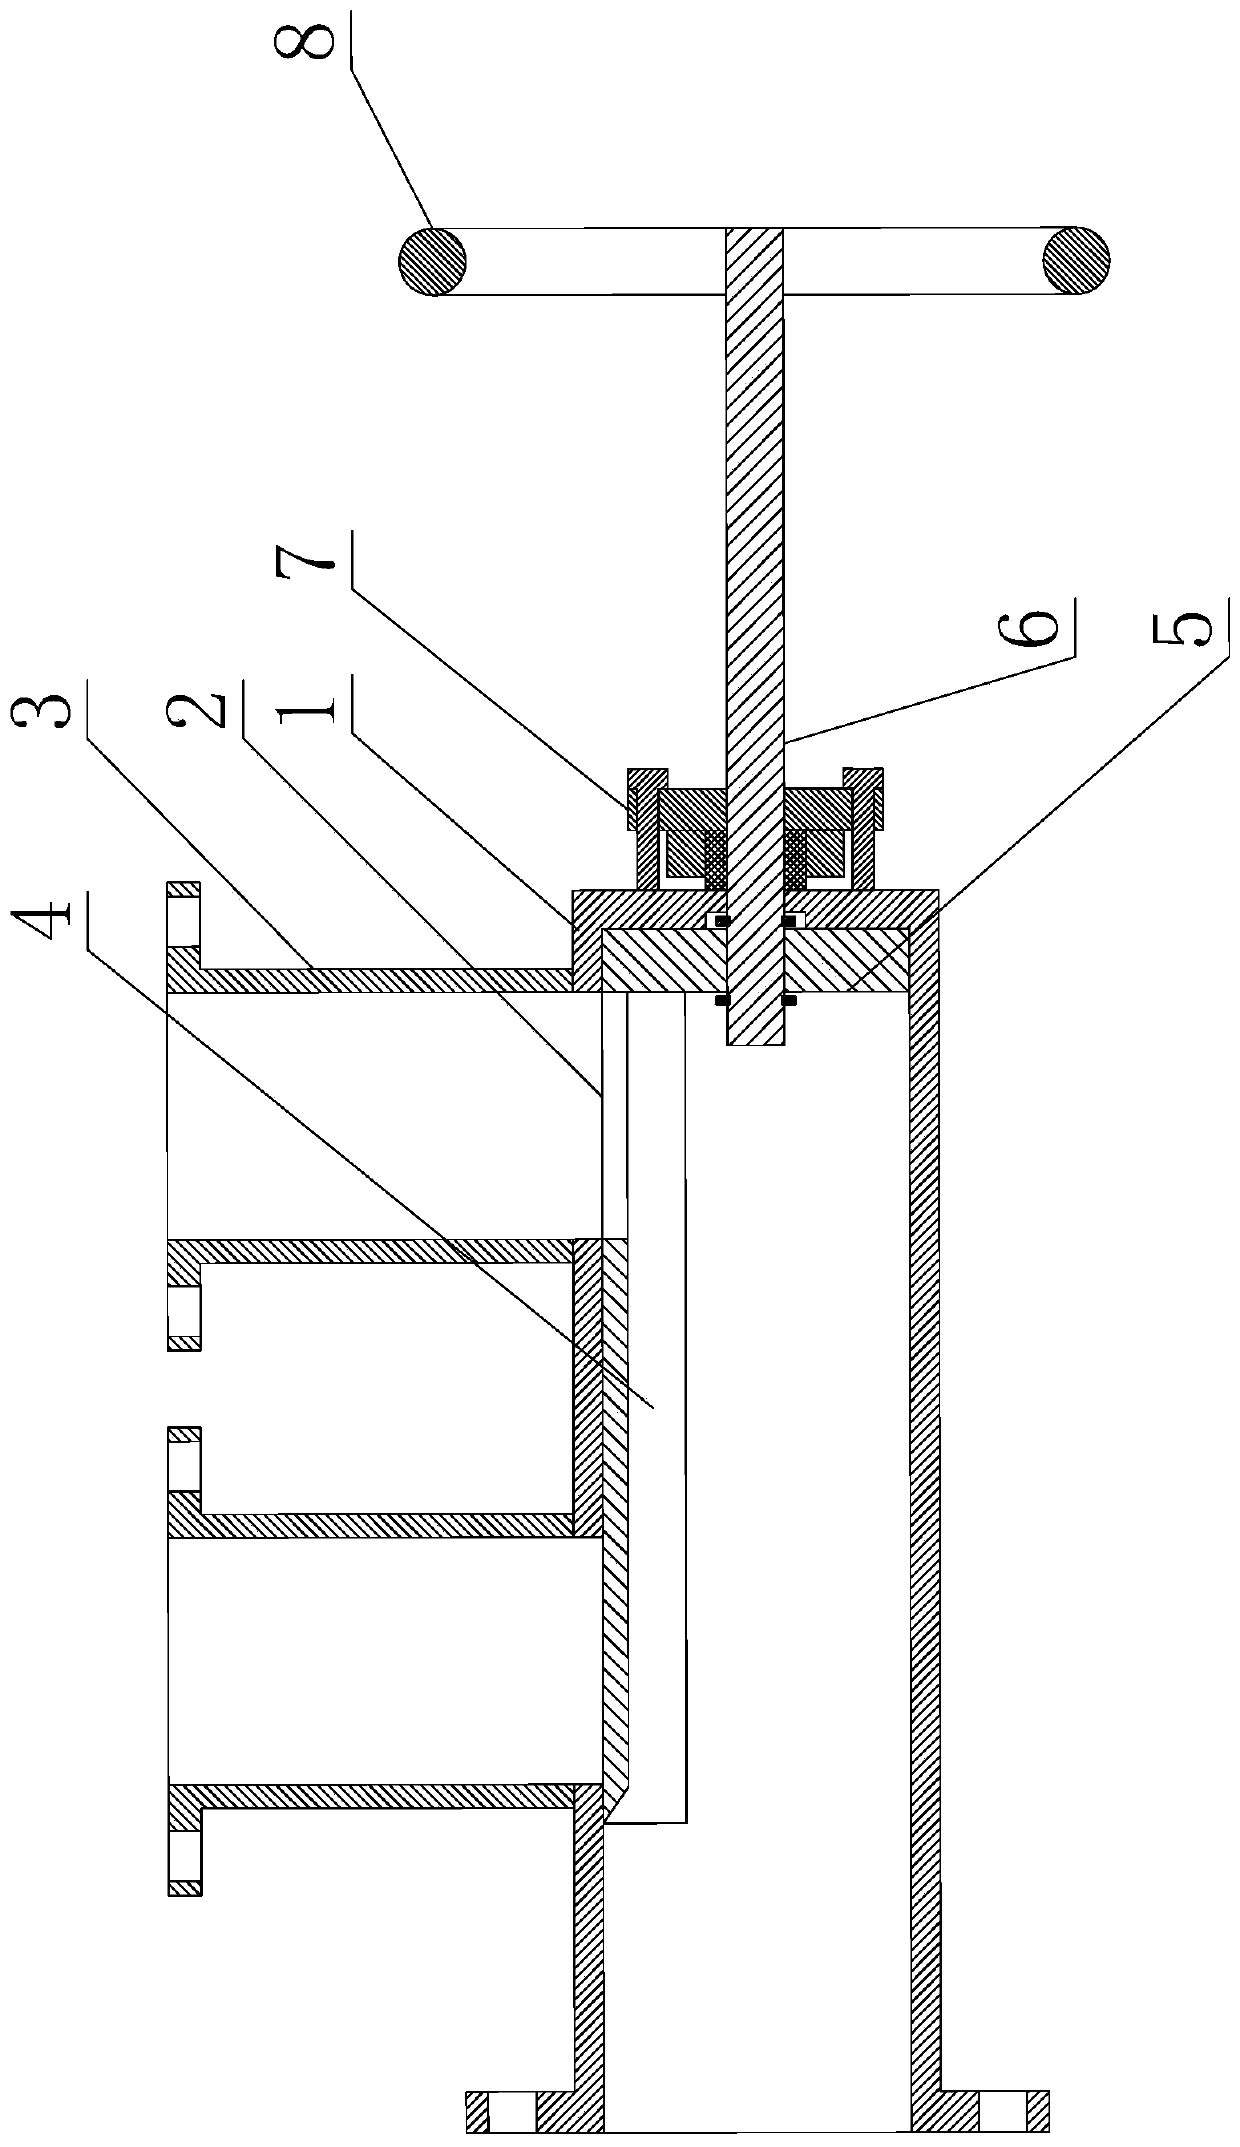 Fluid valve for biomass processing system